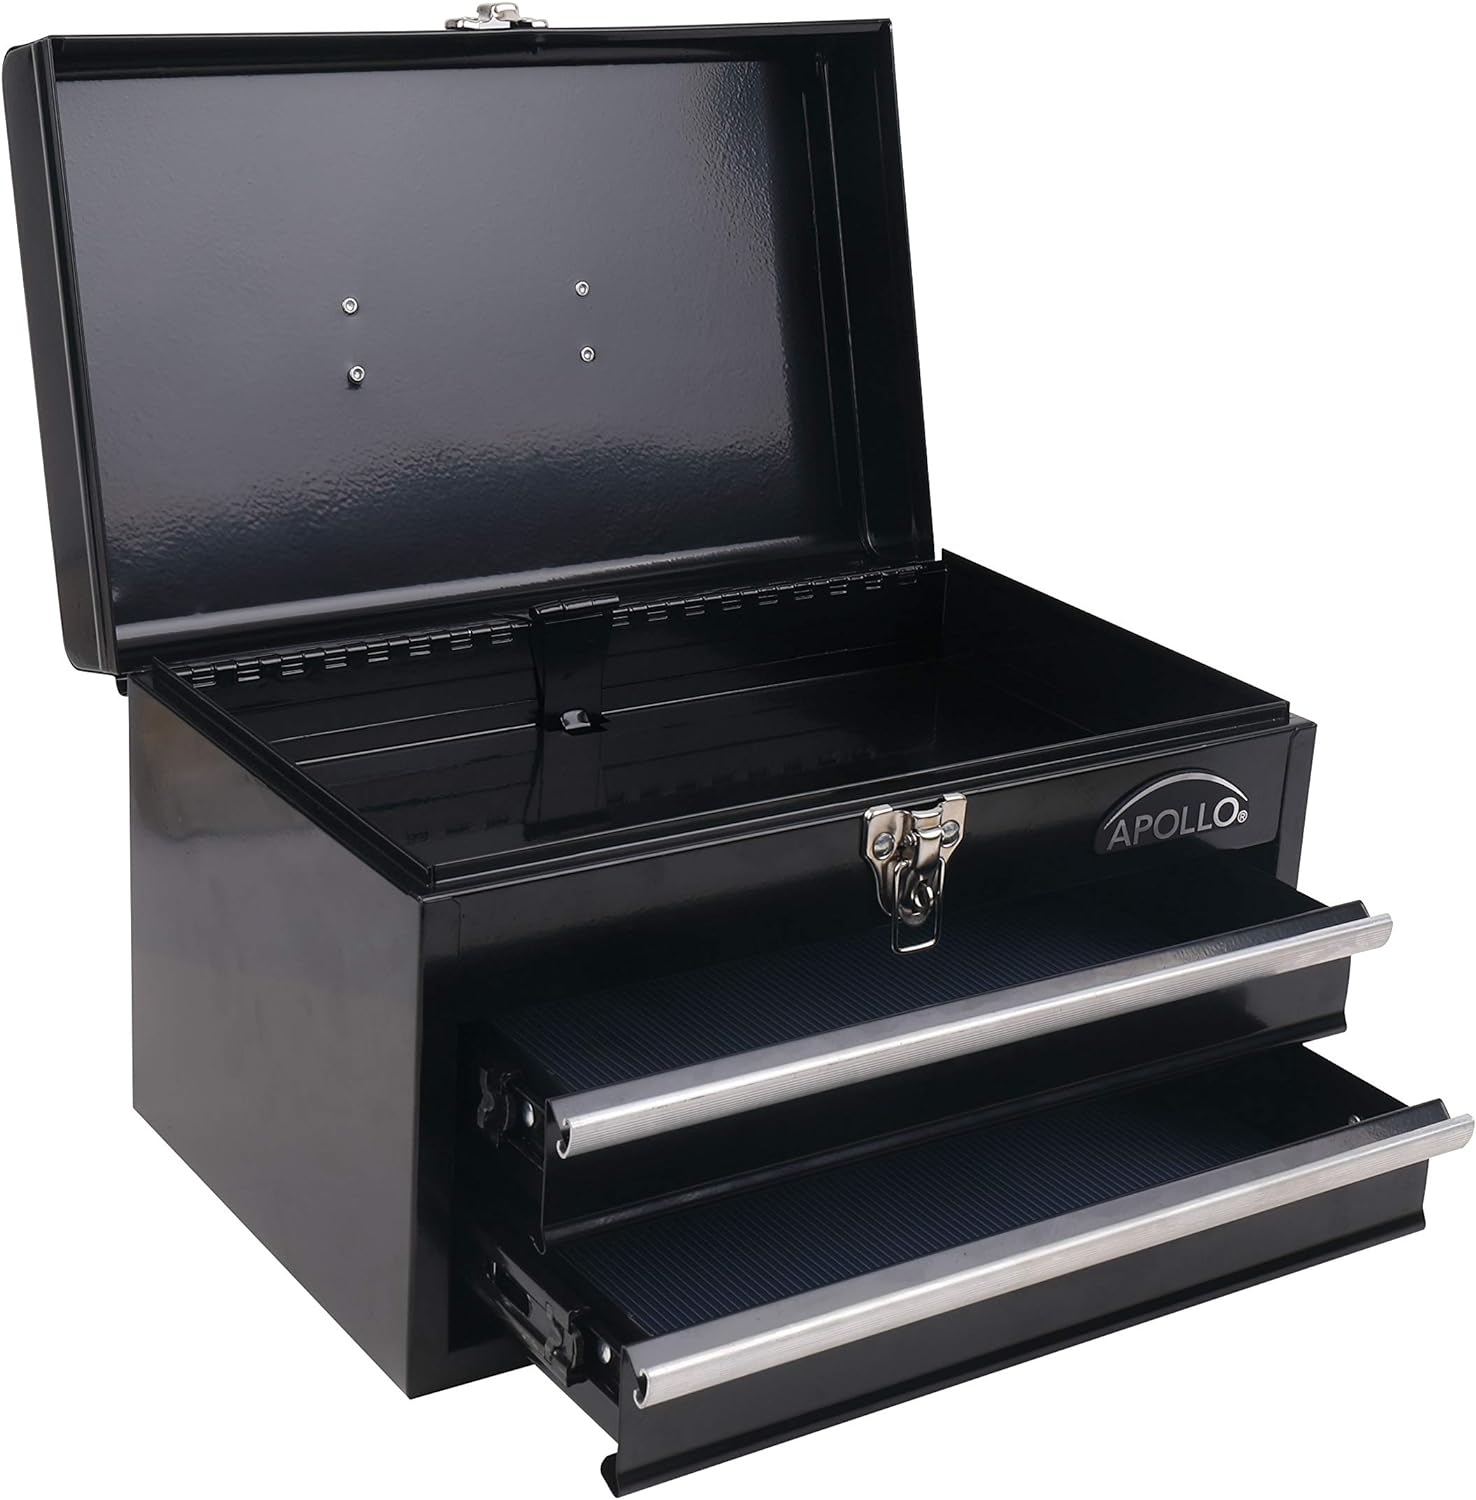 Apollo Precision Tools APOLLO TOOLS Black Metal Tool Box with Deep Top Compartment and 2 Drawers in Heavy-Duty Steel Chest With Ball Bearing Opening A